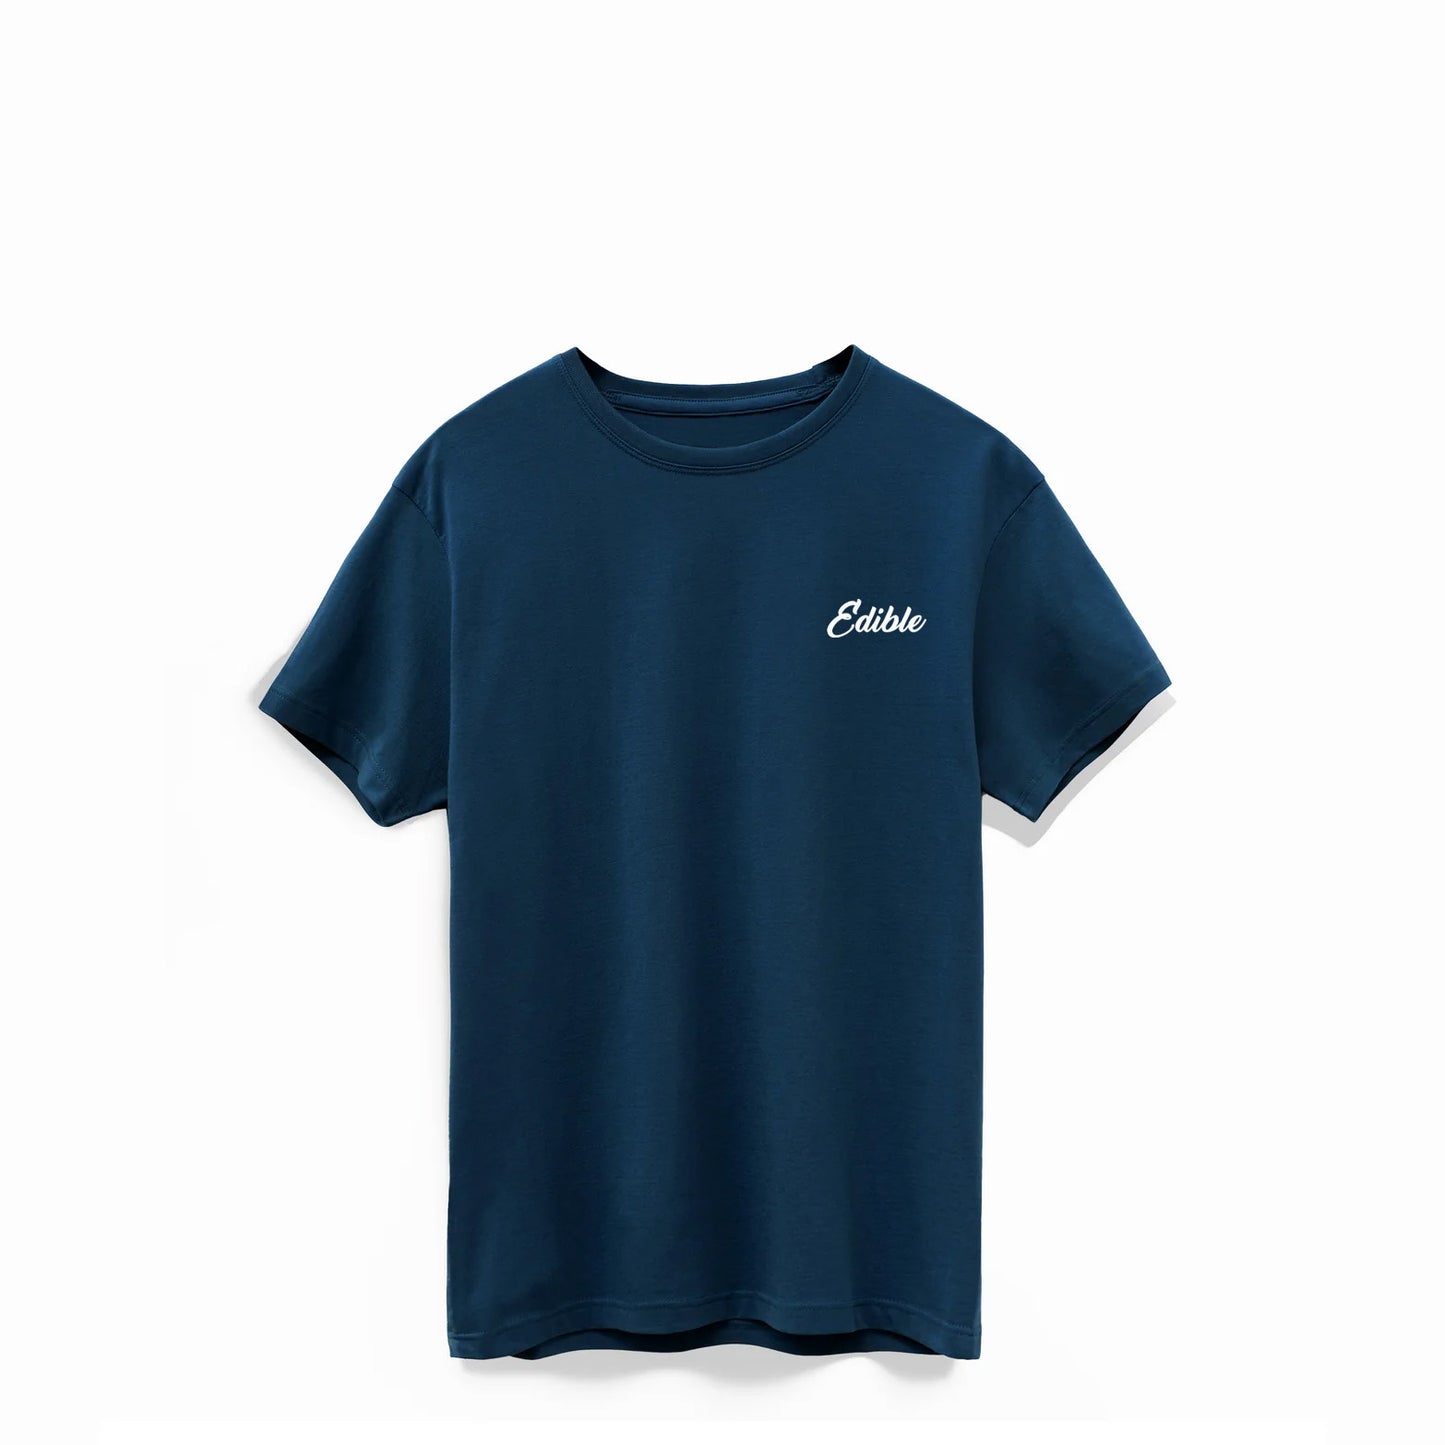 "Edible" Embroidered T-Shirt